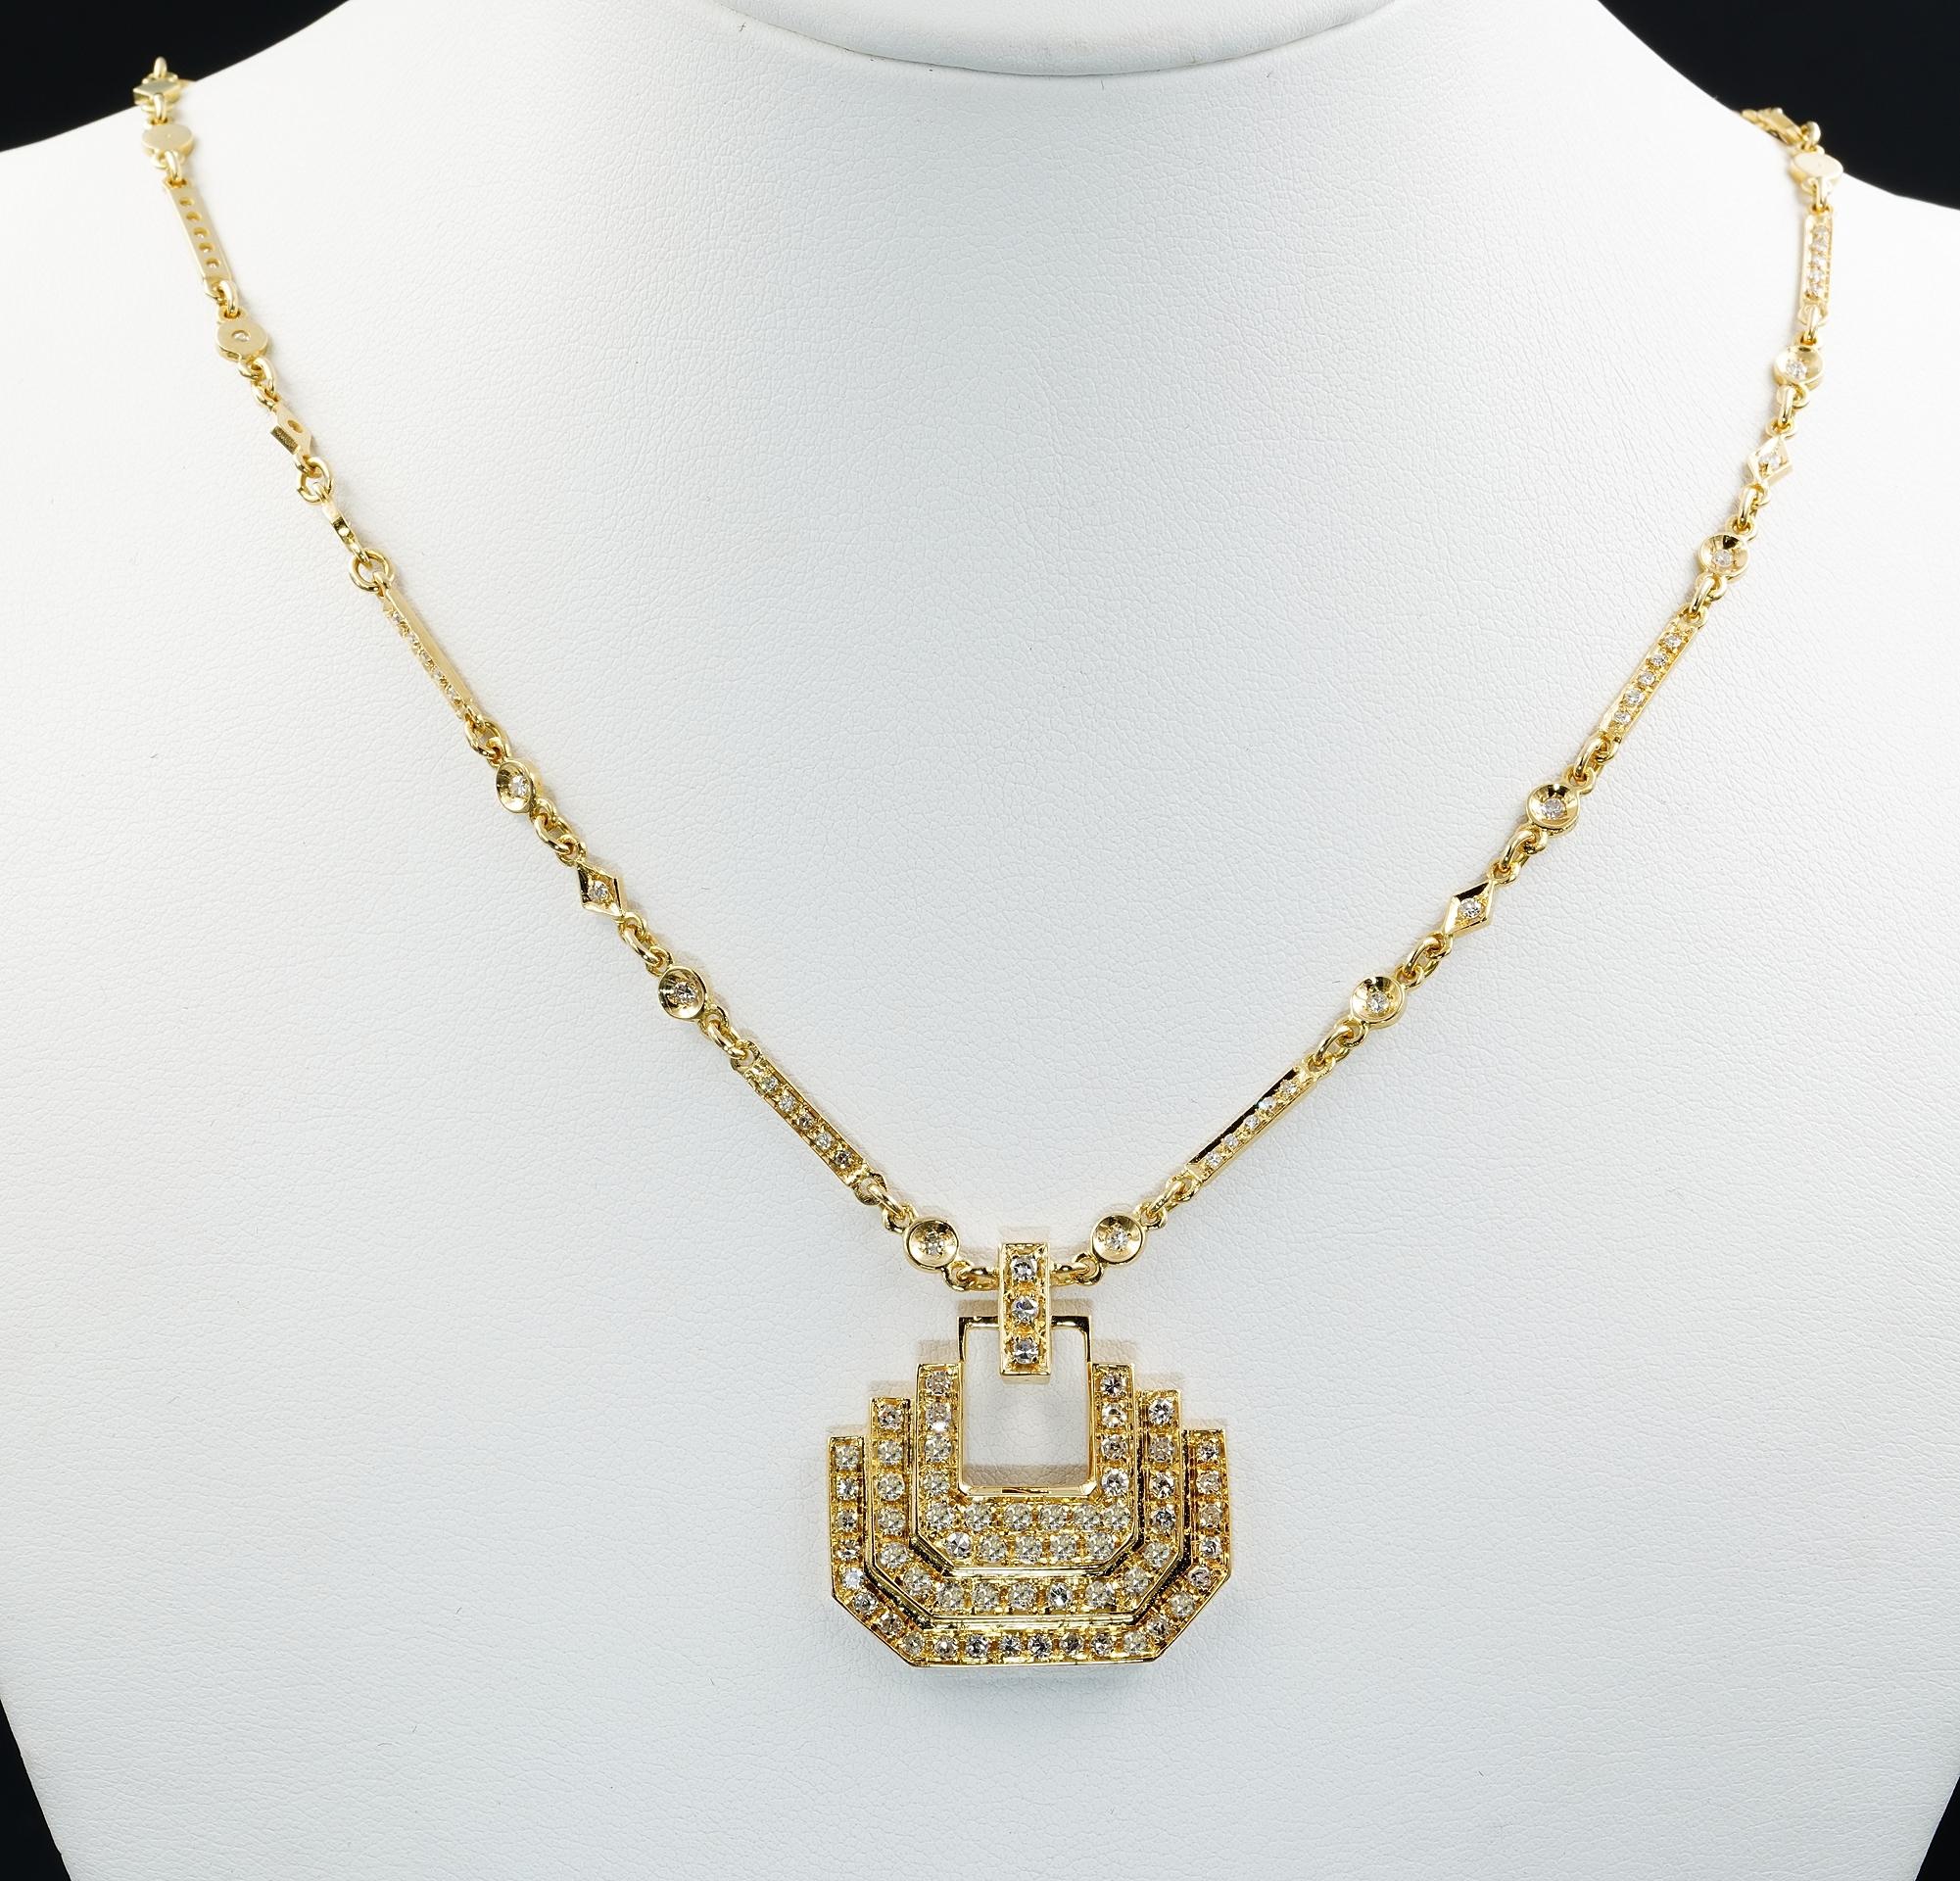 Timeless  vintage Jewellery
This beautiful Diamond necklace is hand fabricated in rich 18K yellow gold, signed by Mario Fontana 1960 ca
Comprising a large Diamond pendant of striking geometry presented with a dedicated multi-link chain highlighted